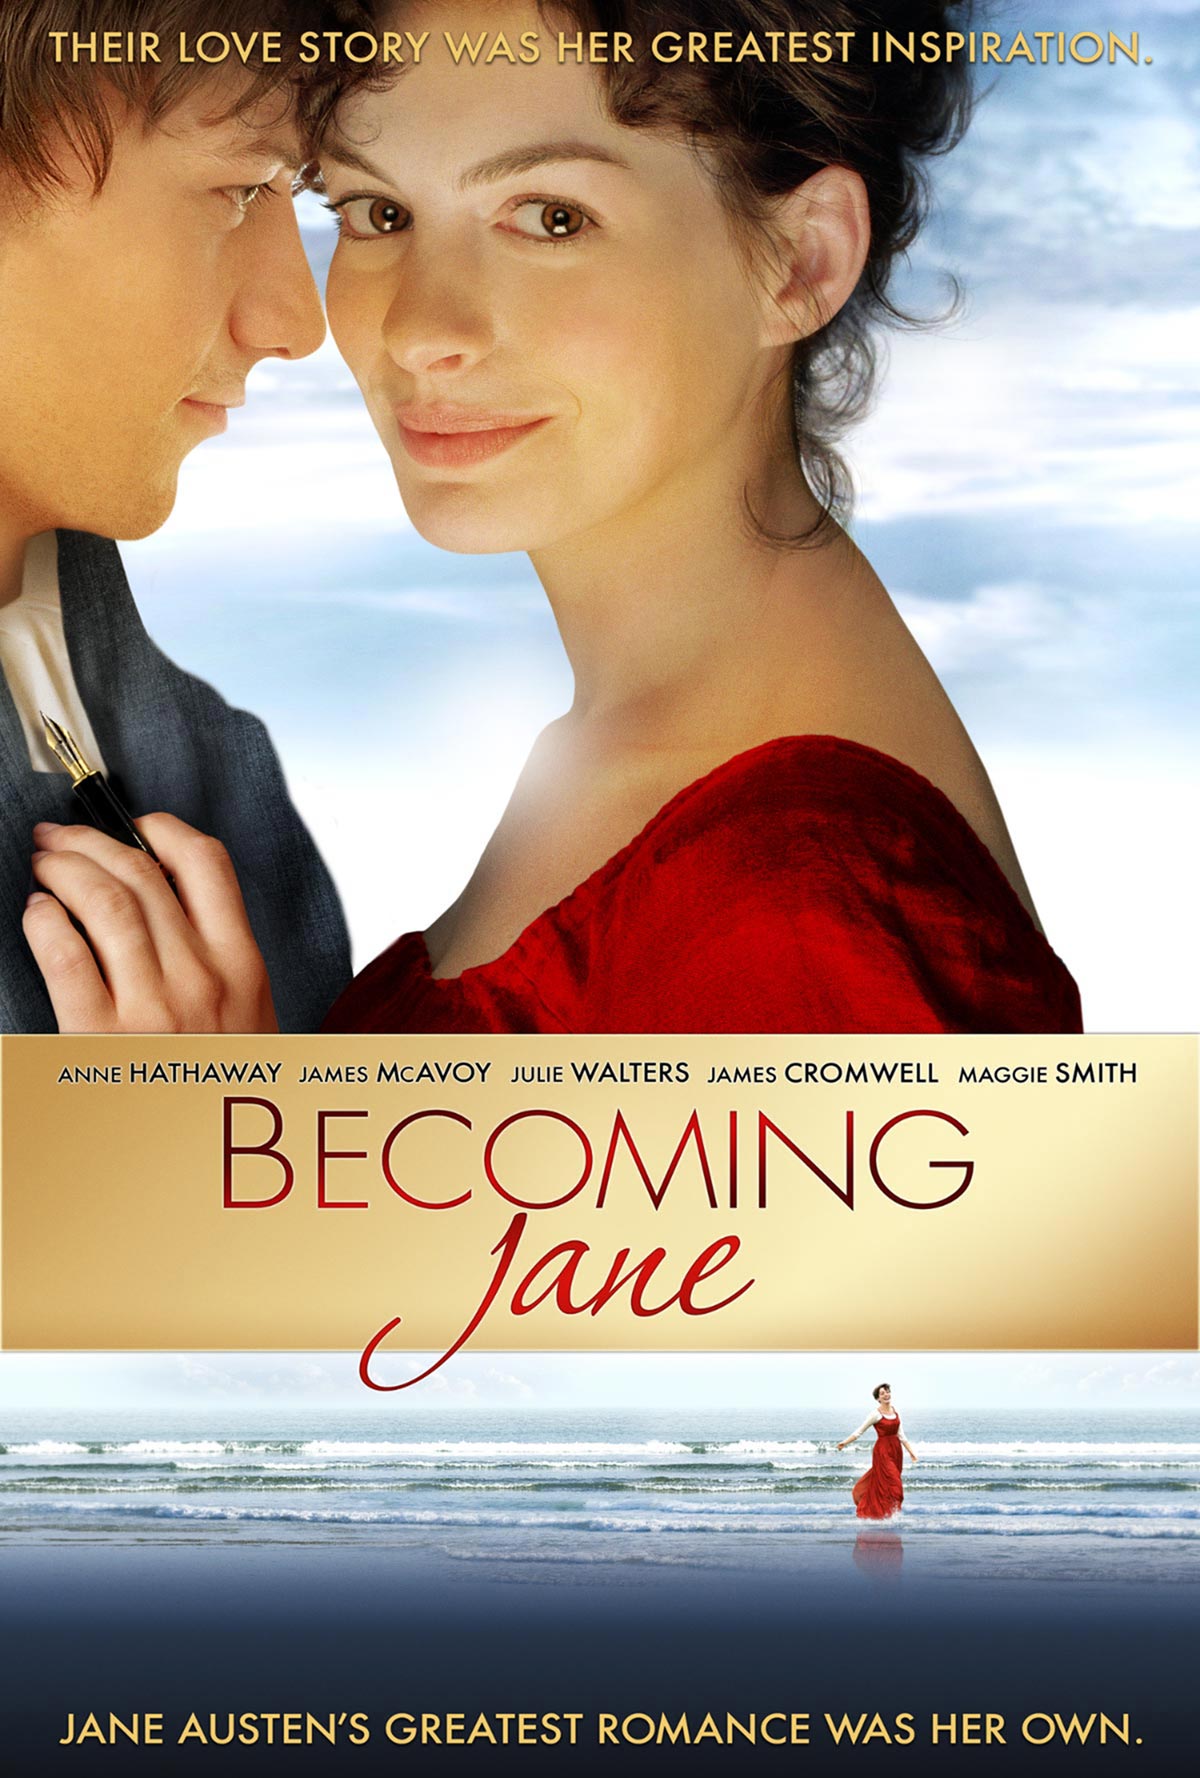 052_dreamogram-iconisus-key-art-movie-poster-becoming-jane_vertical-cover